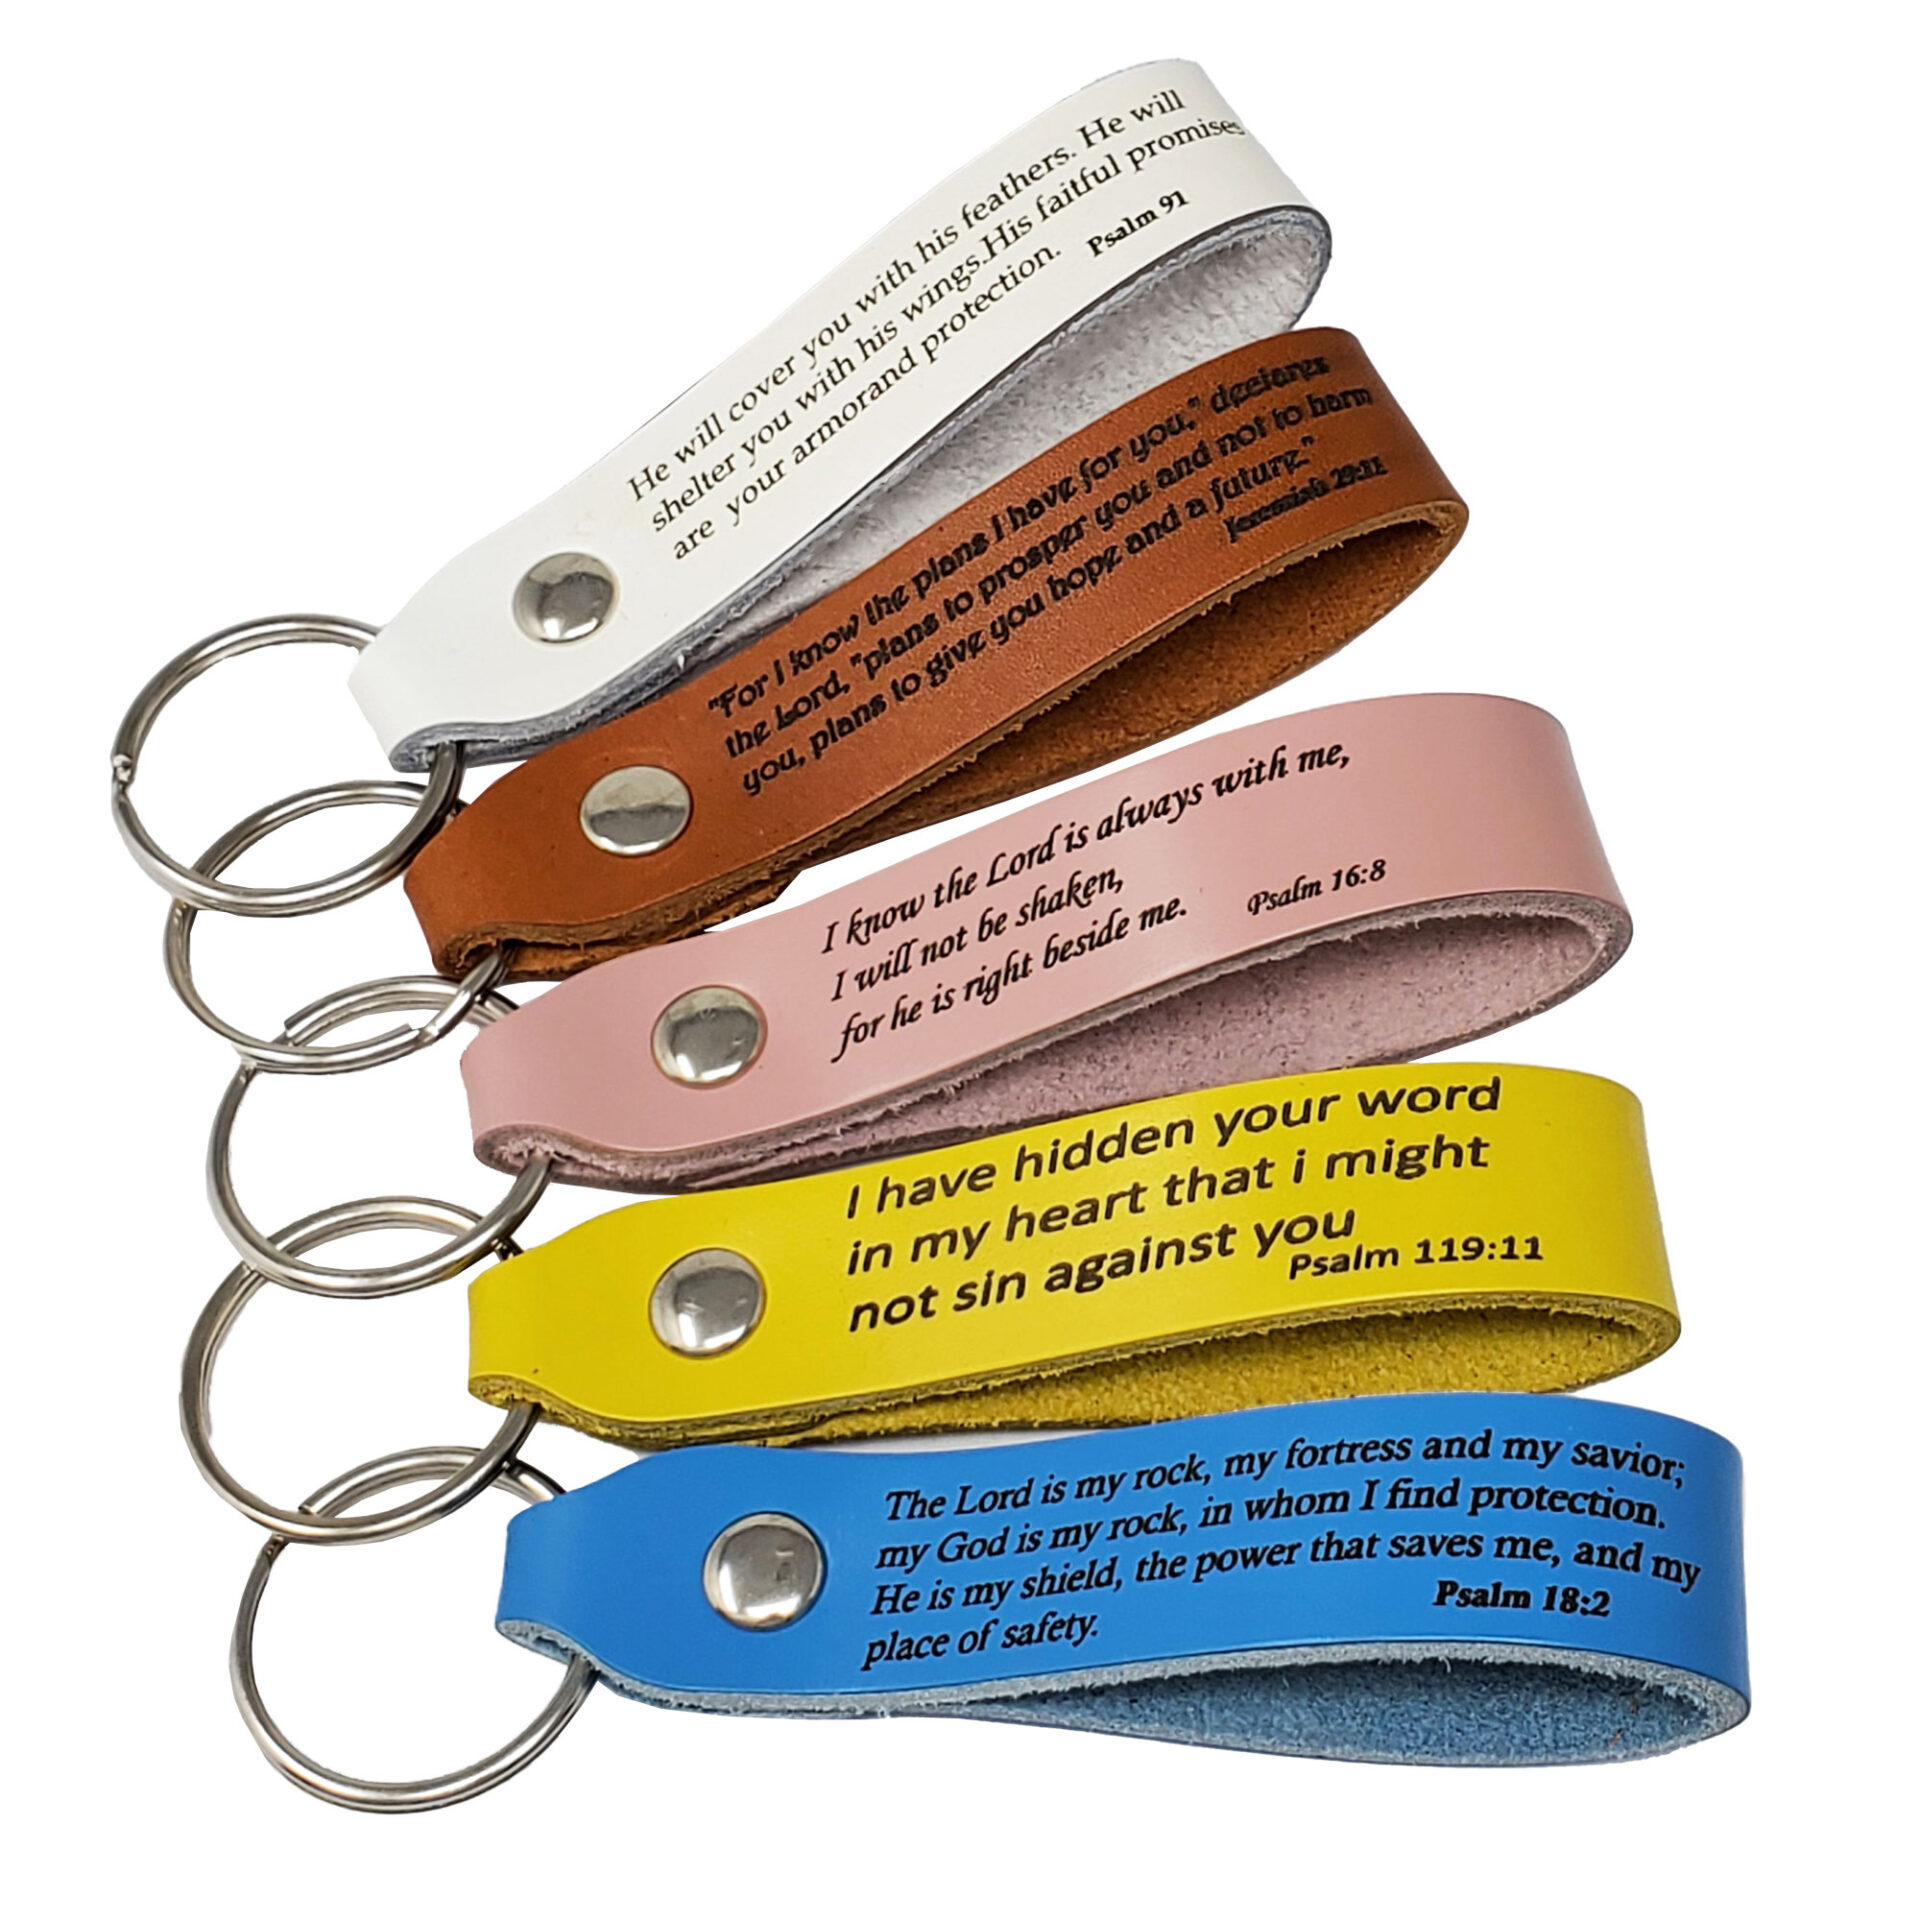 10 Pack Blank Leather Keychains Kit Laser Engraving, Foil  Stamping-fundraising Ideas-promotional, Business, Personalized Gifts 